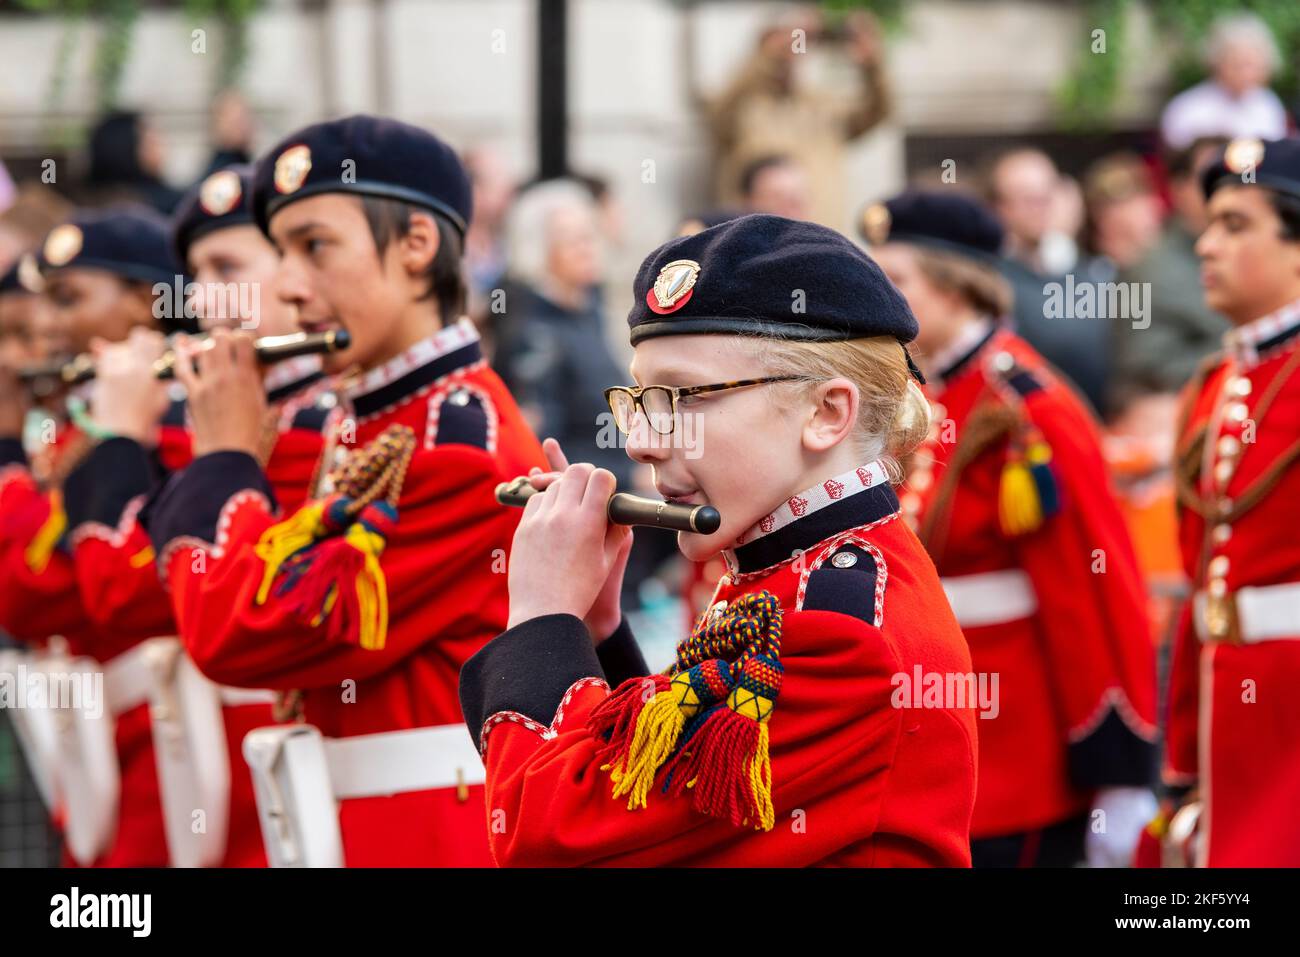 St Dunstan’s College Combined Cadet Force marching band at the Lord Mayor's Show parade in the City of London, UK. Young female flutist Stock Photo